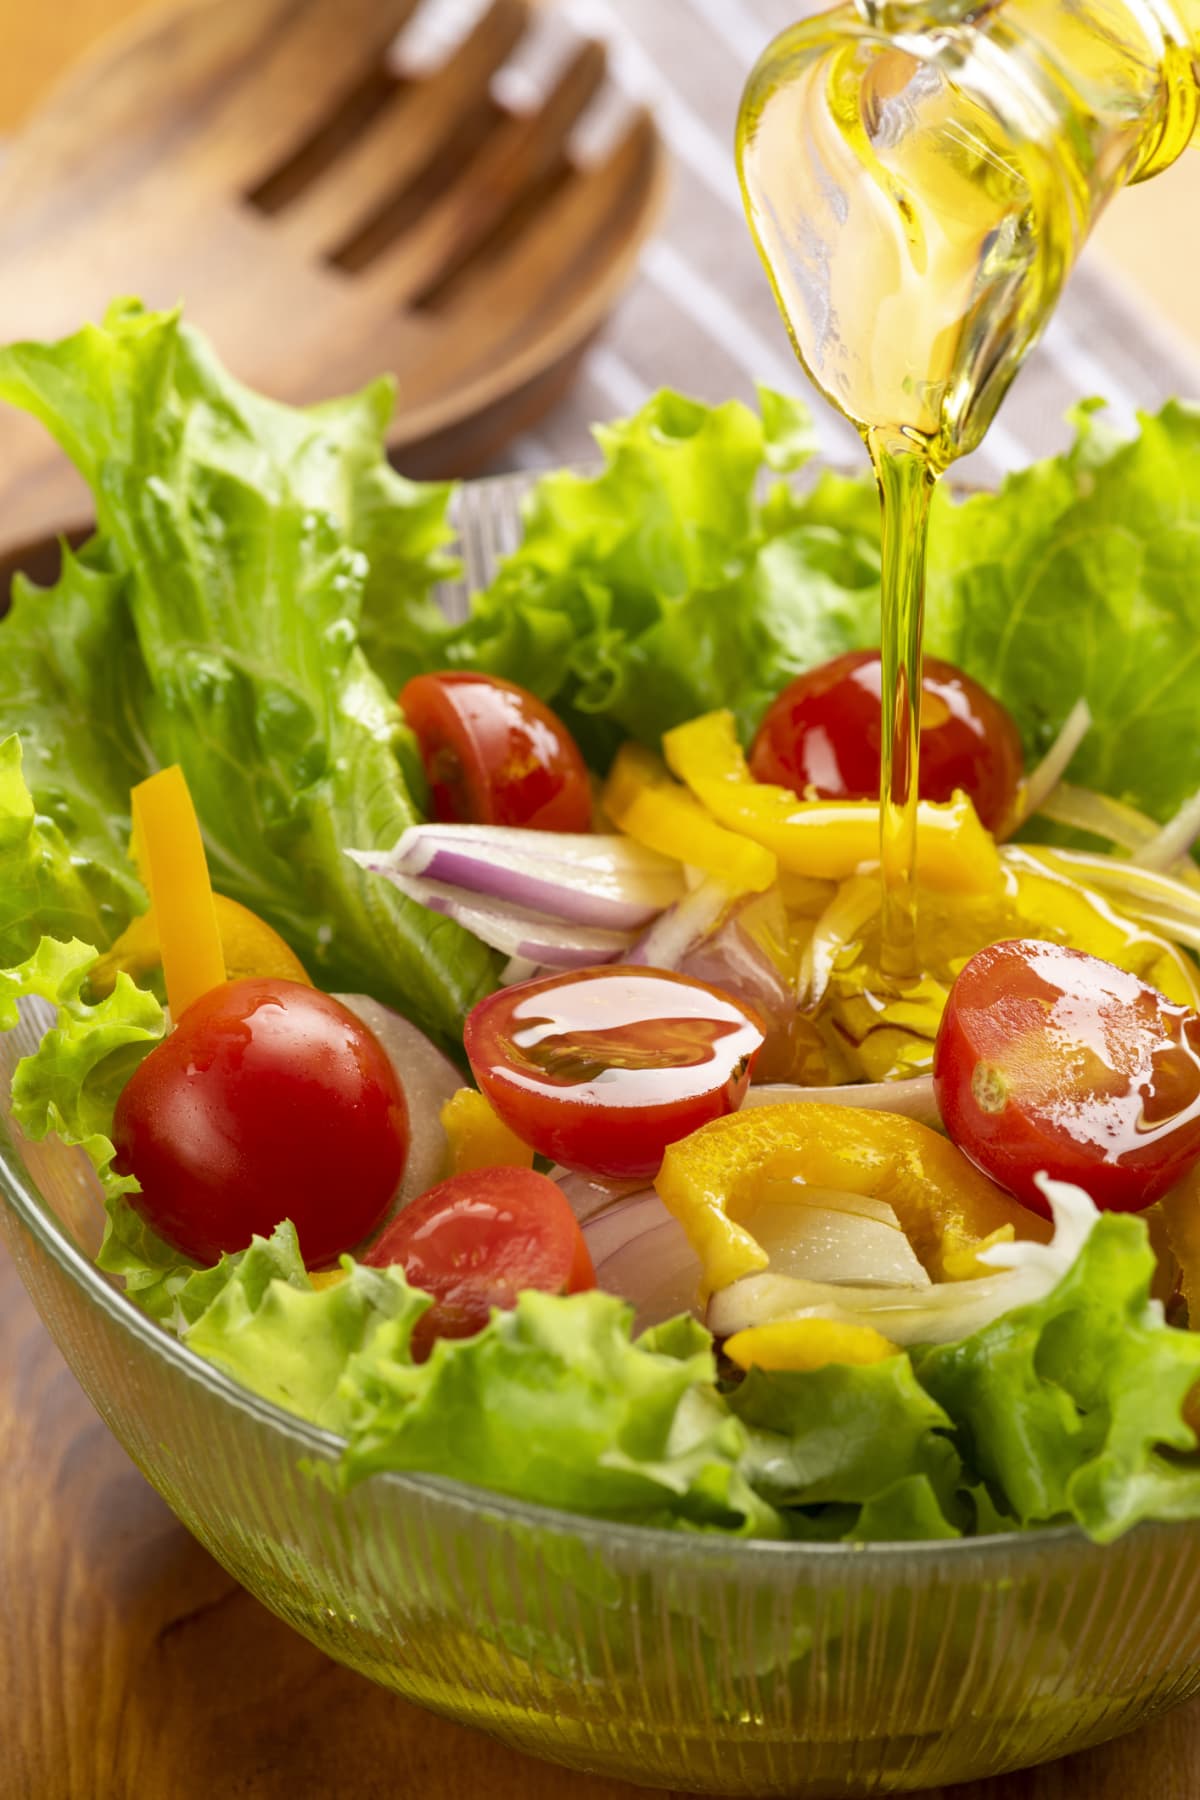 Tomato, onion, and lettuce salad with olive oil in a clear bowl